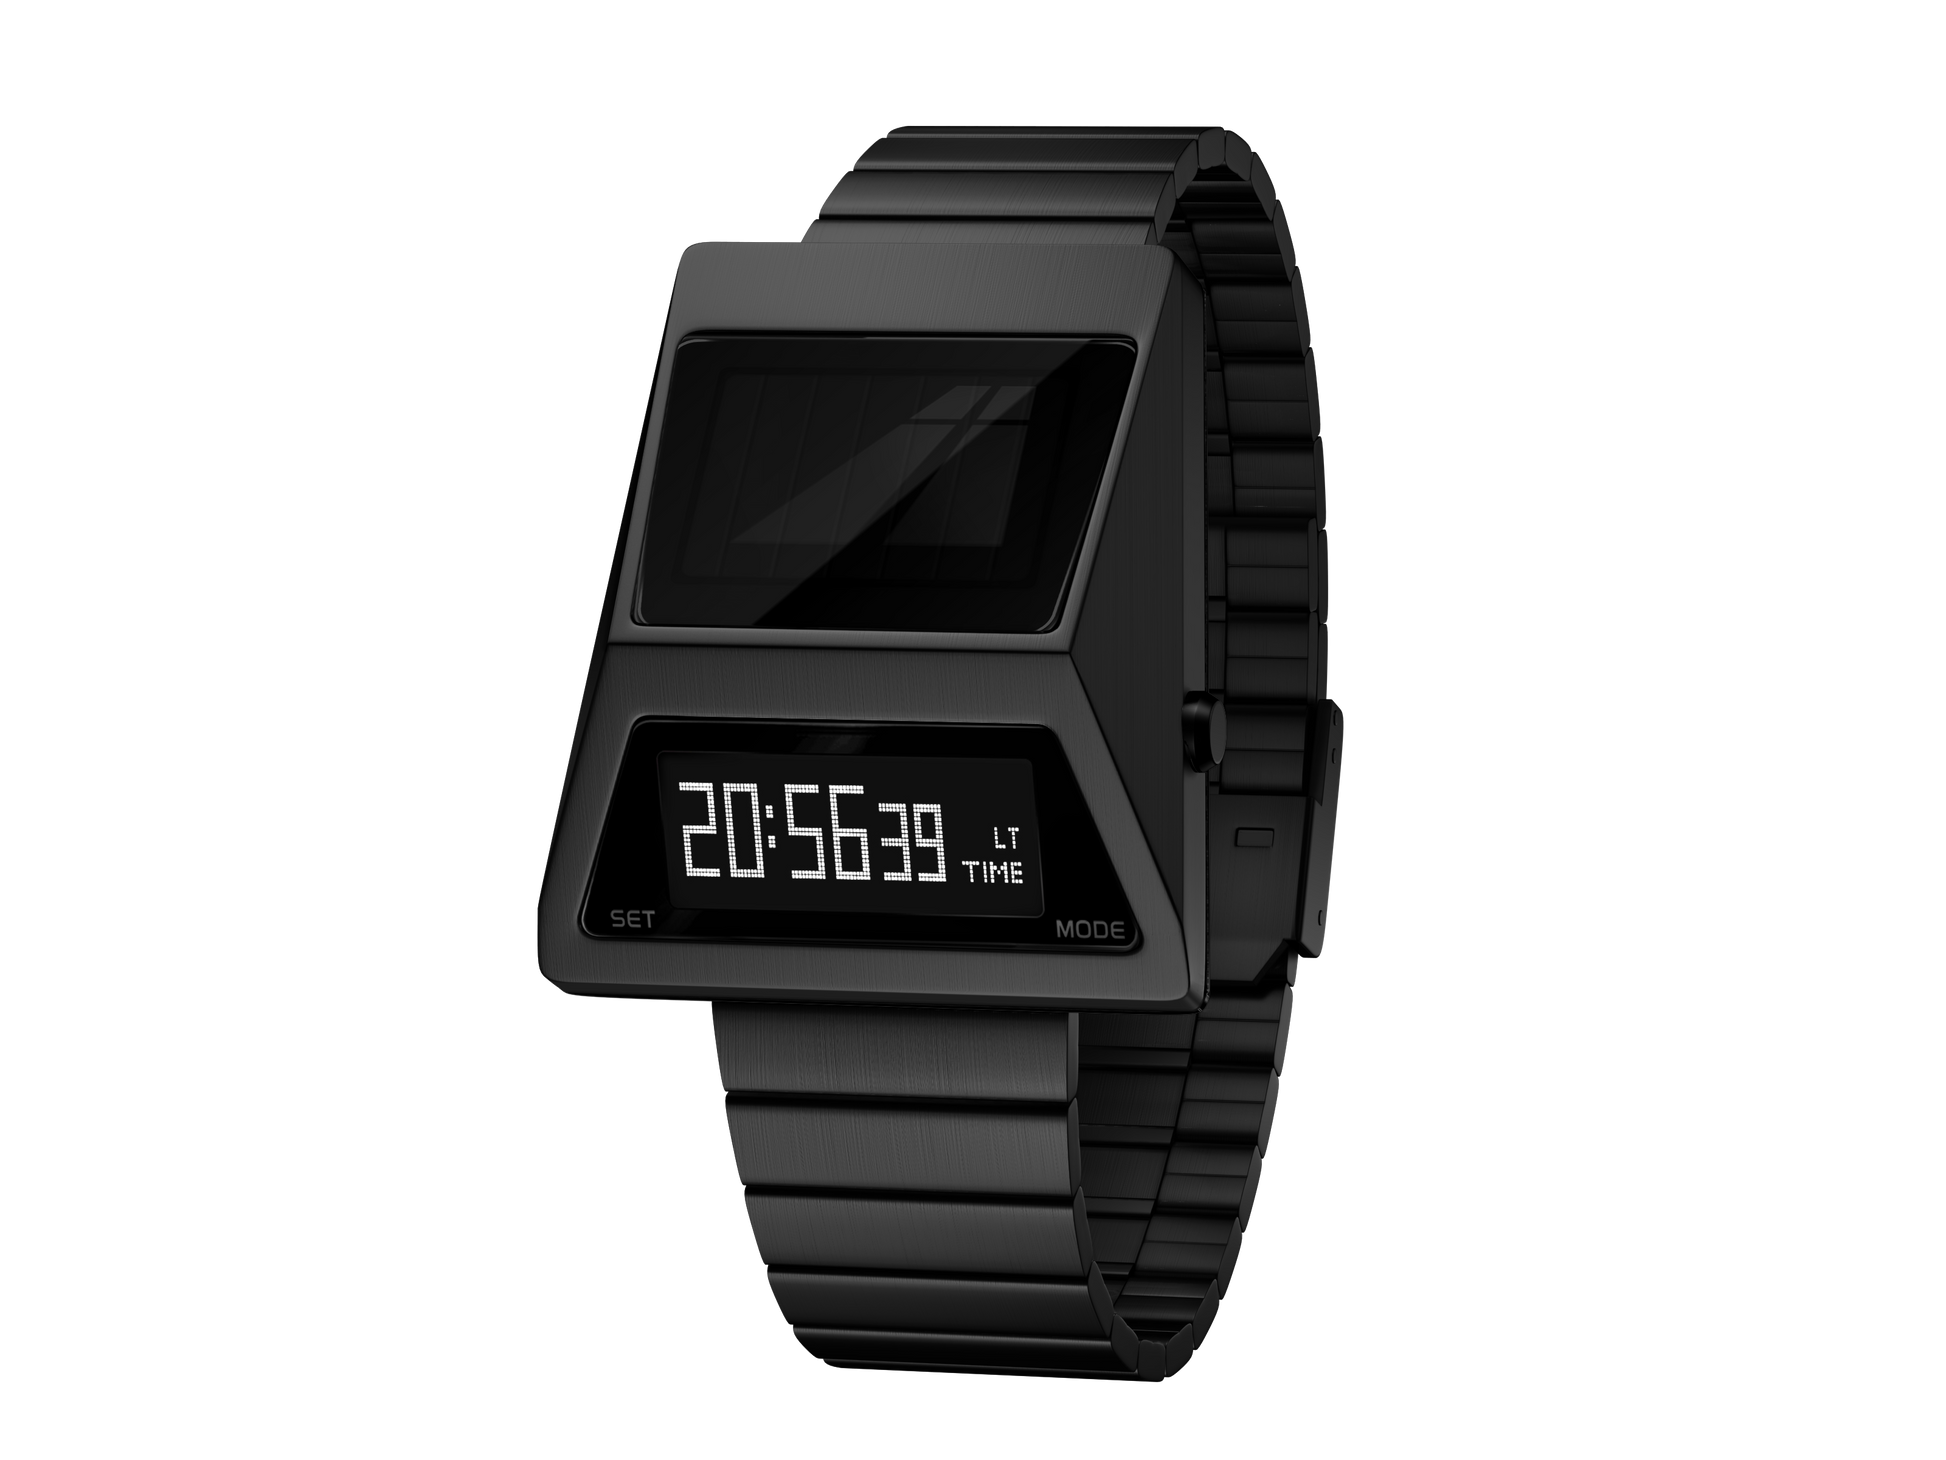 solar-powered-cyber-watches-s3000B-W-top view